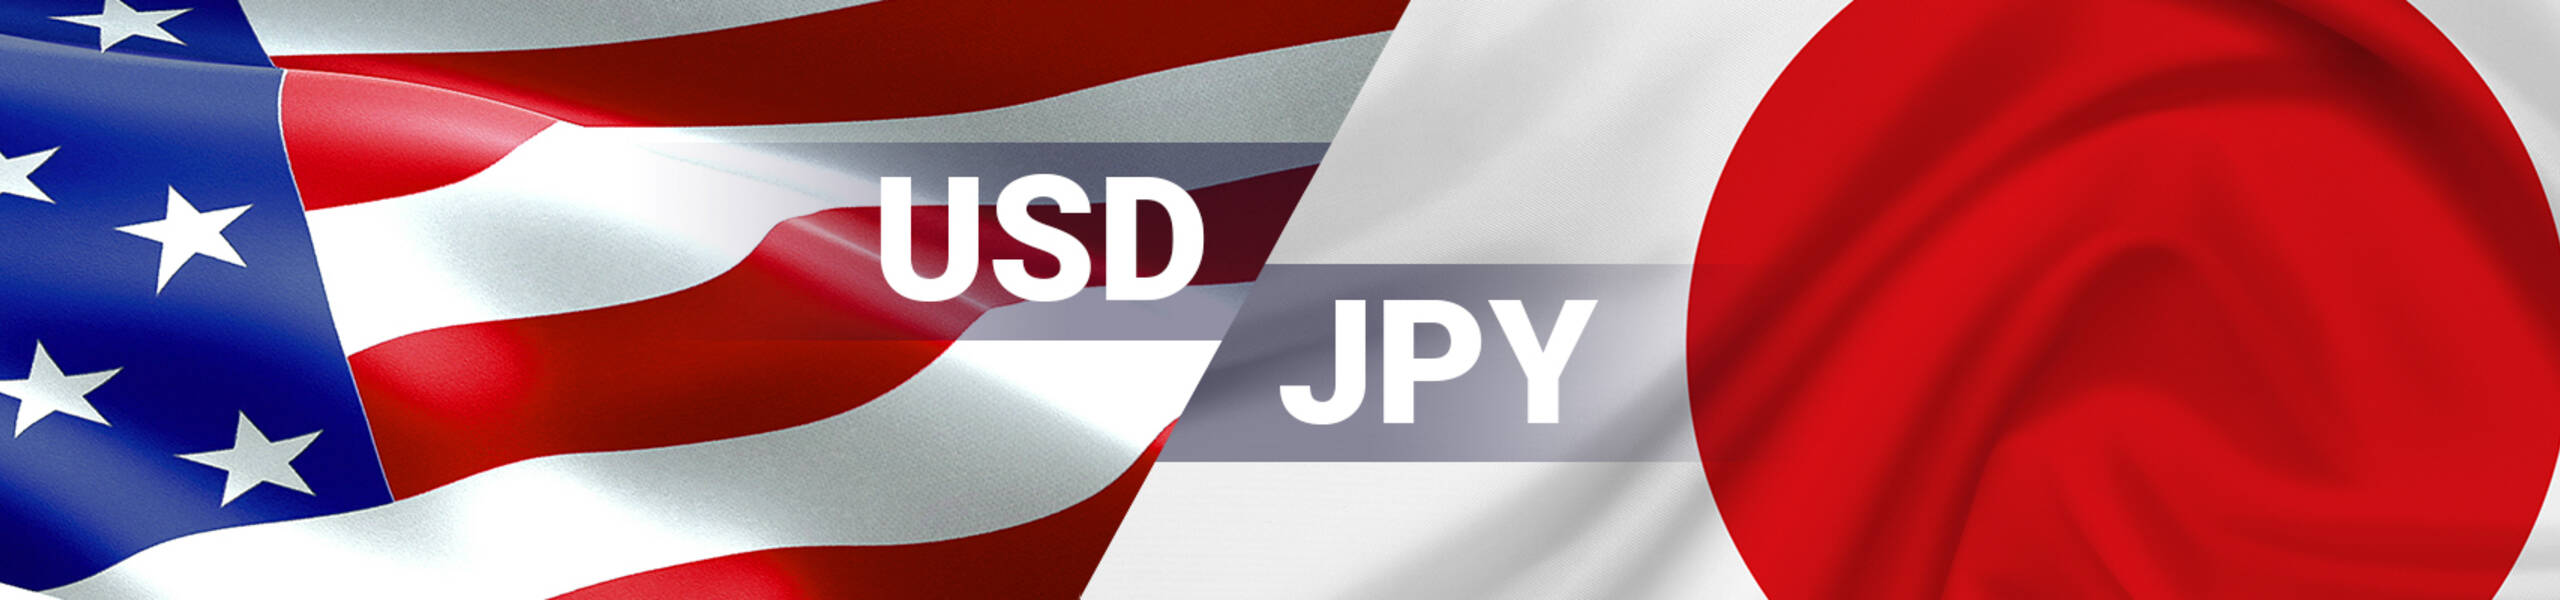 USD/JPY Dailyレポート 2018/01/16